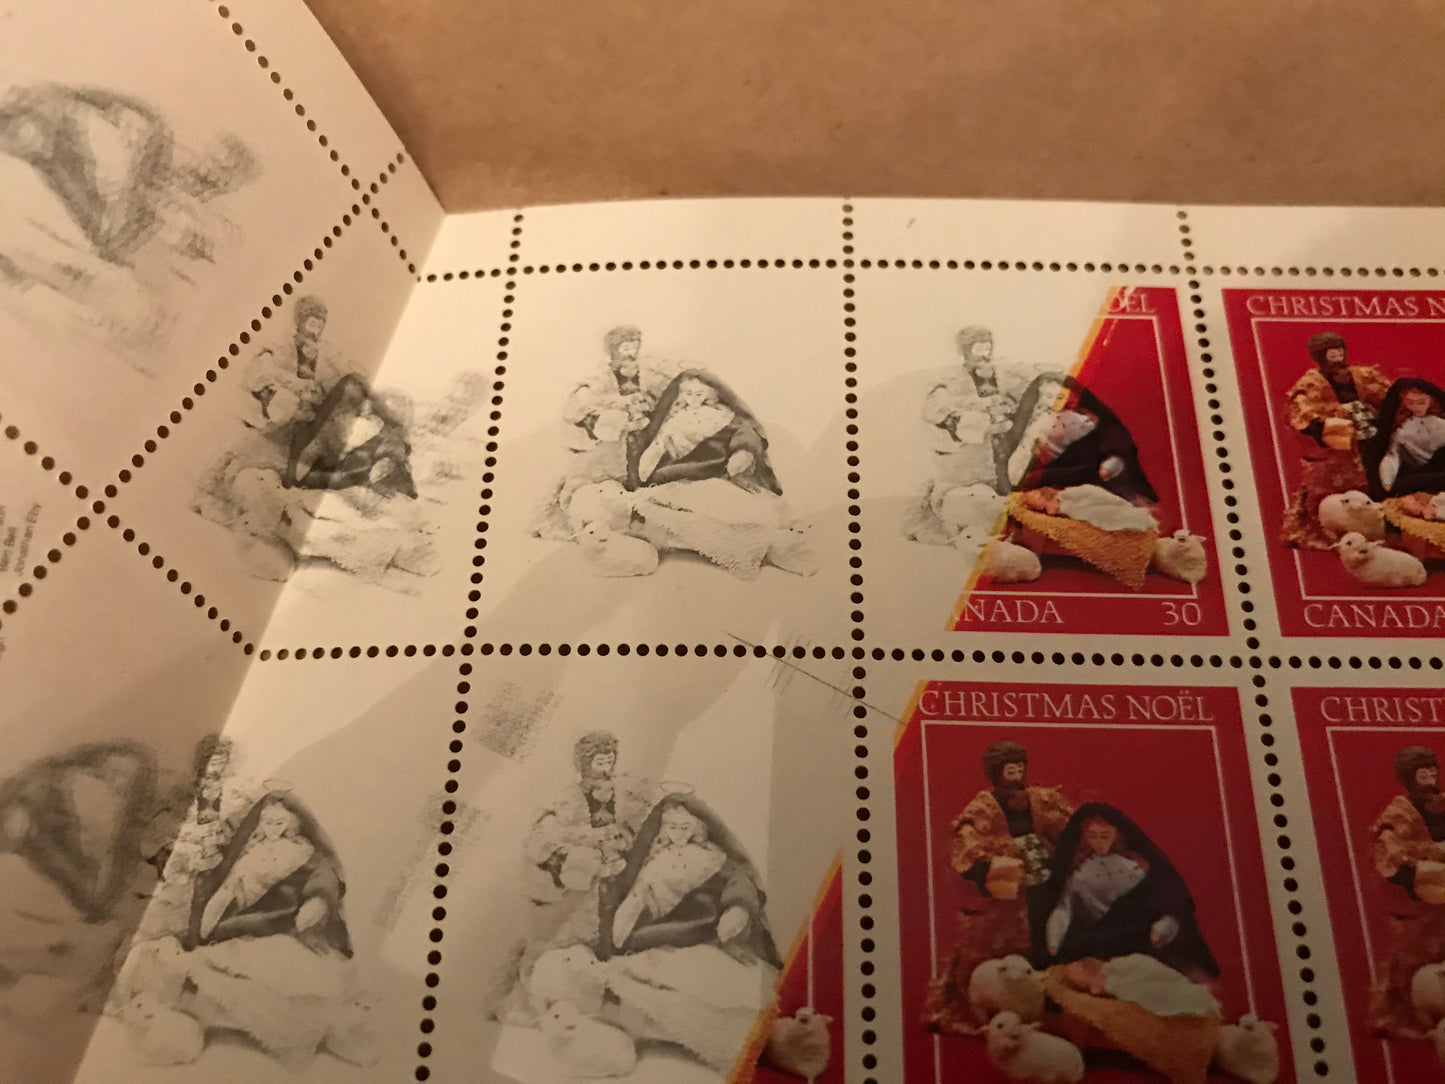 Canada #973a & 973b - 1982 Christmas Issue, The Unique Foldover Error Sheet of 50